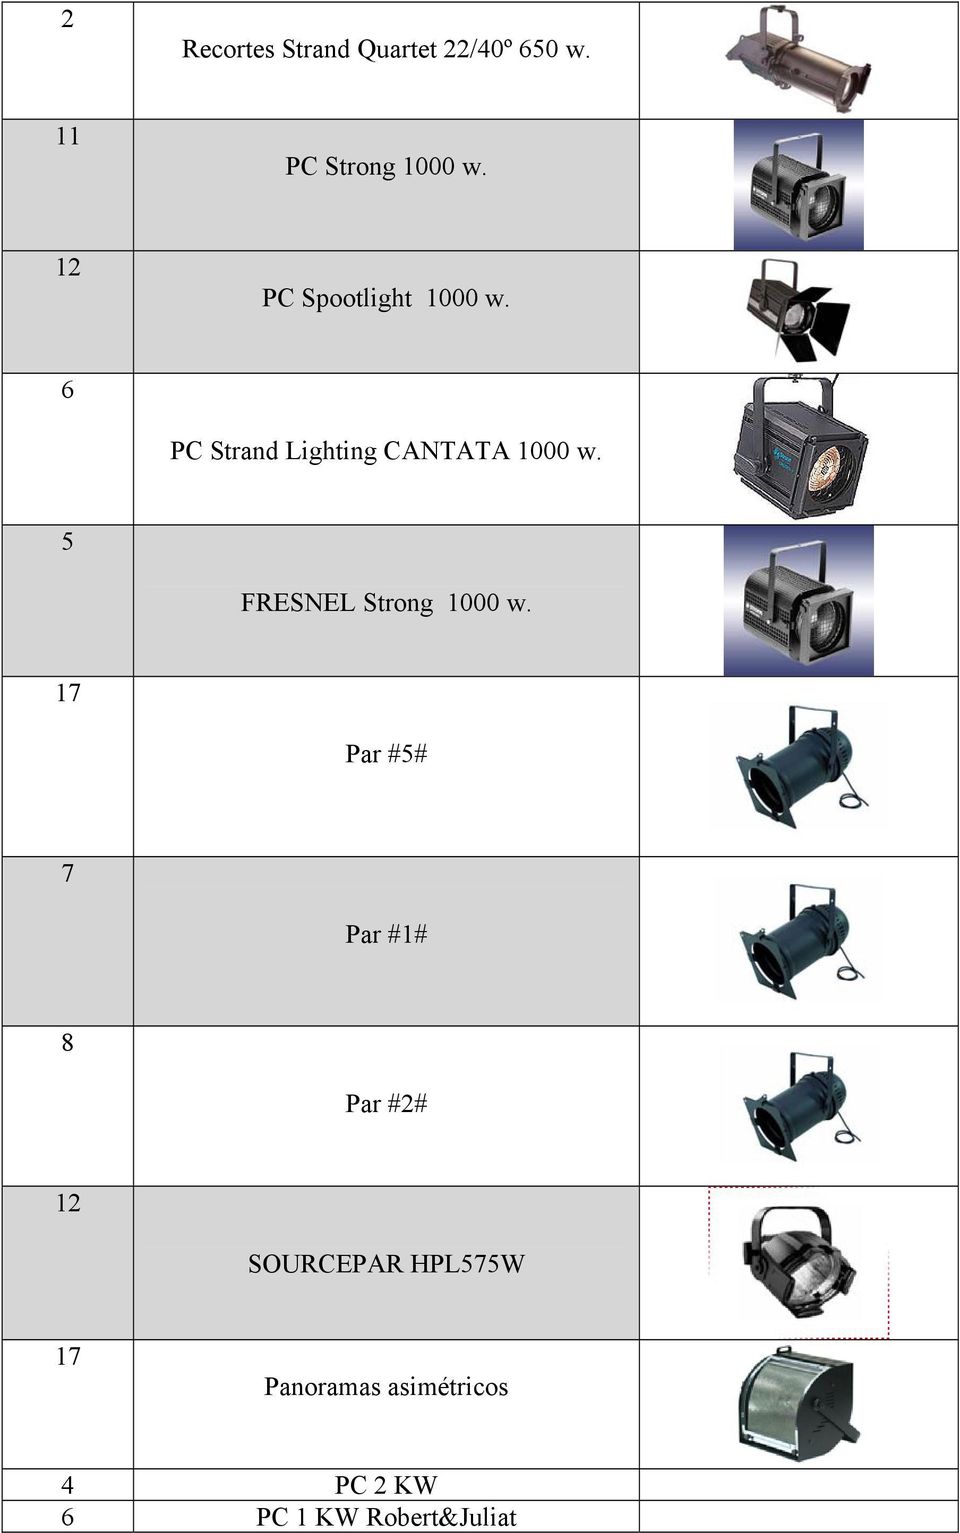 5 FRESNEL Strong 1000 w.